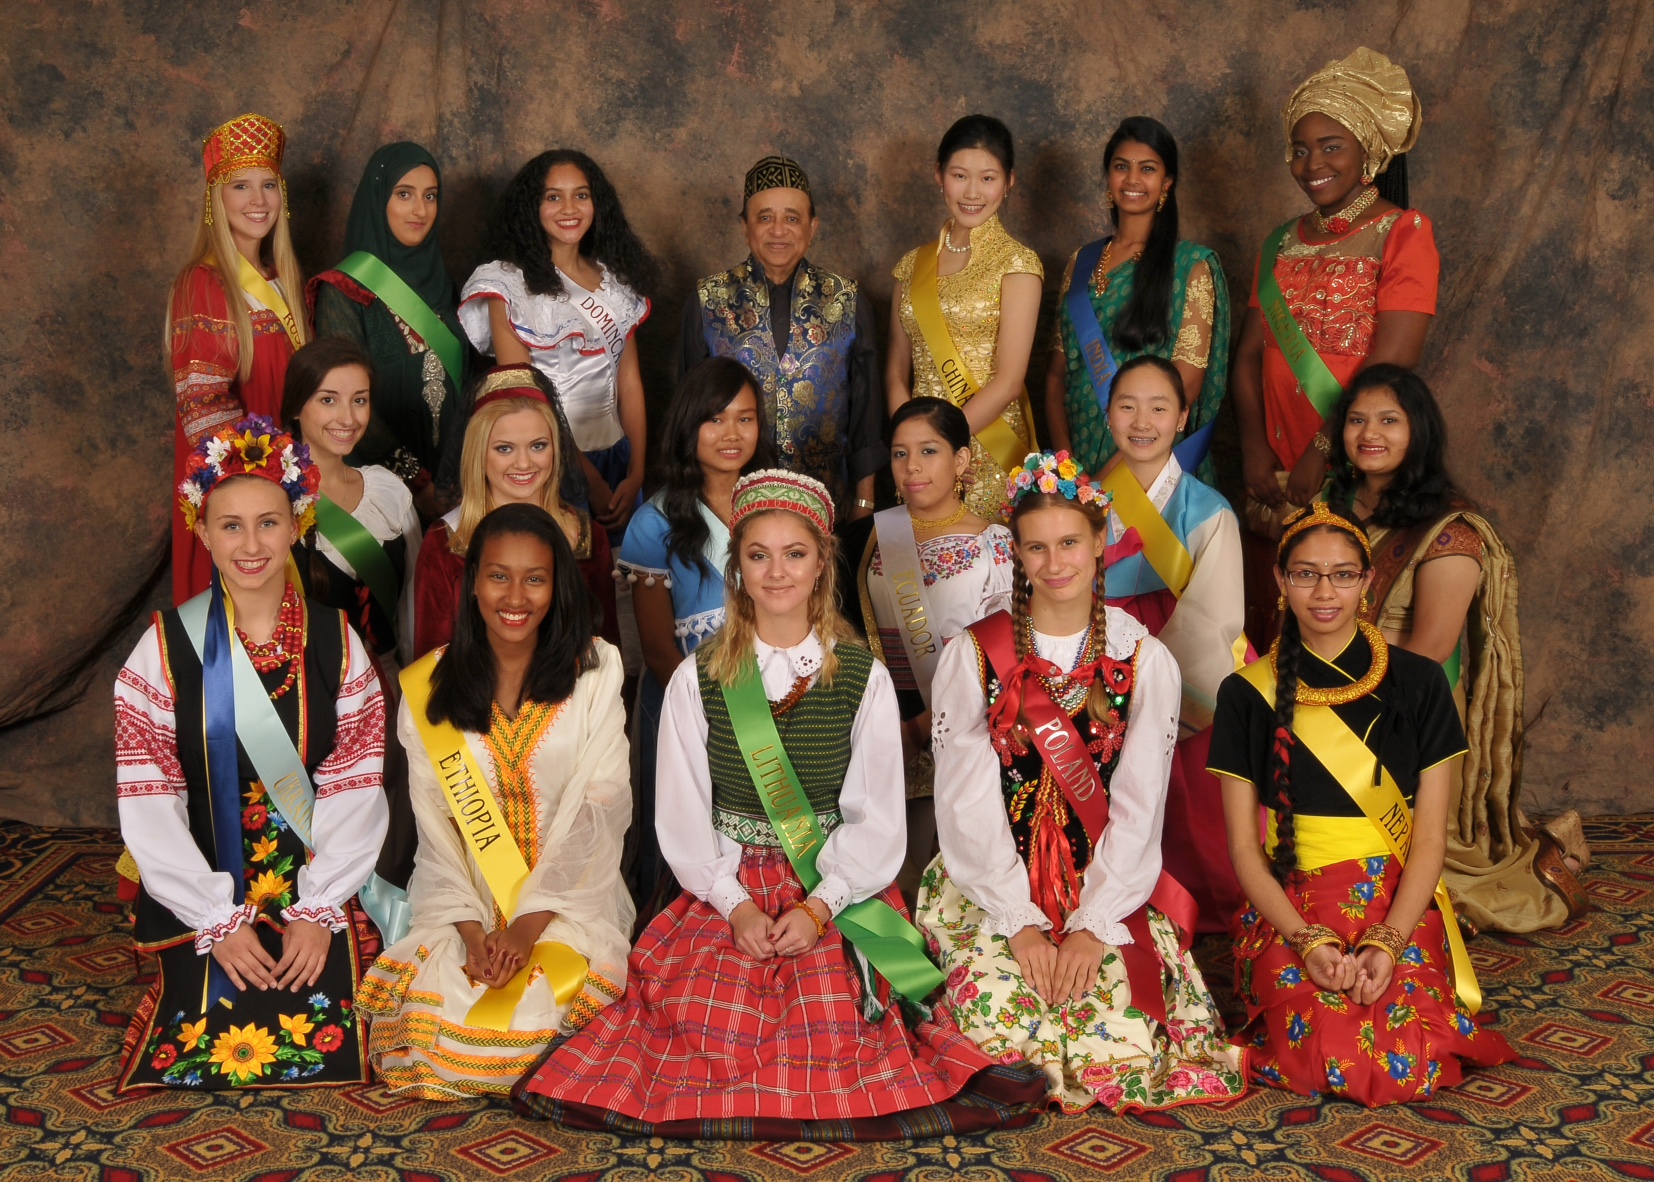 Festival of Nations contestants from 19 countries celebrate diversity